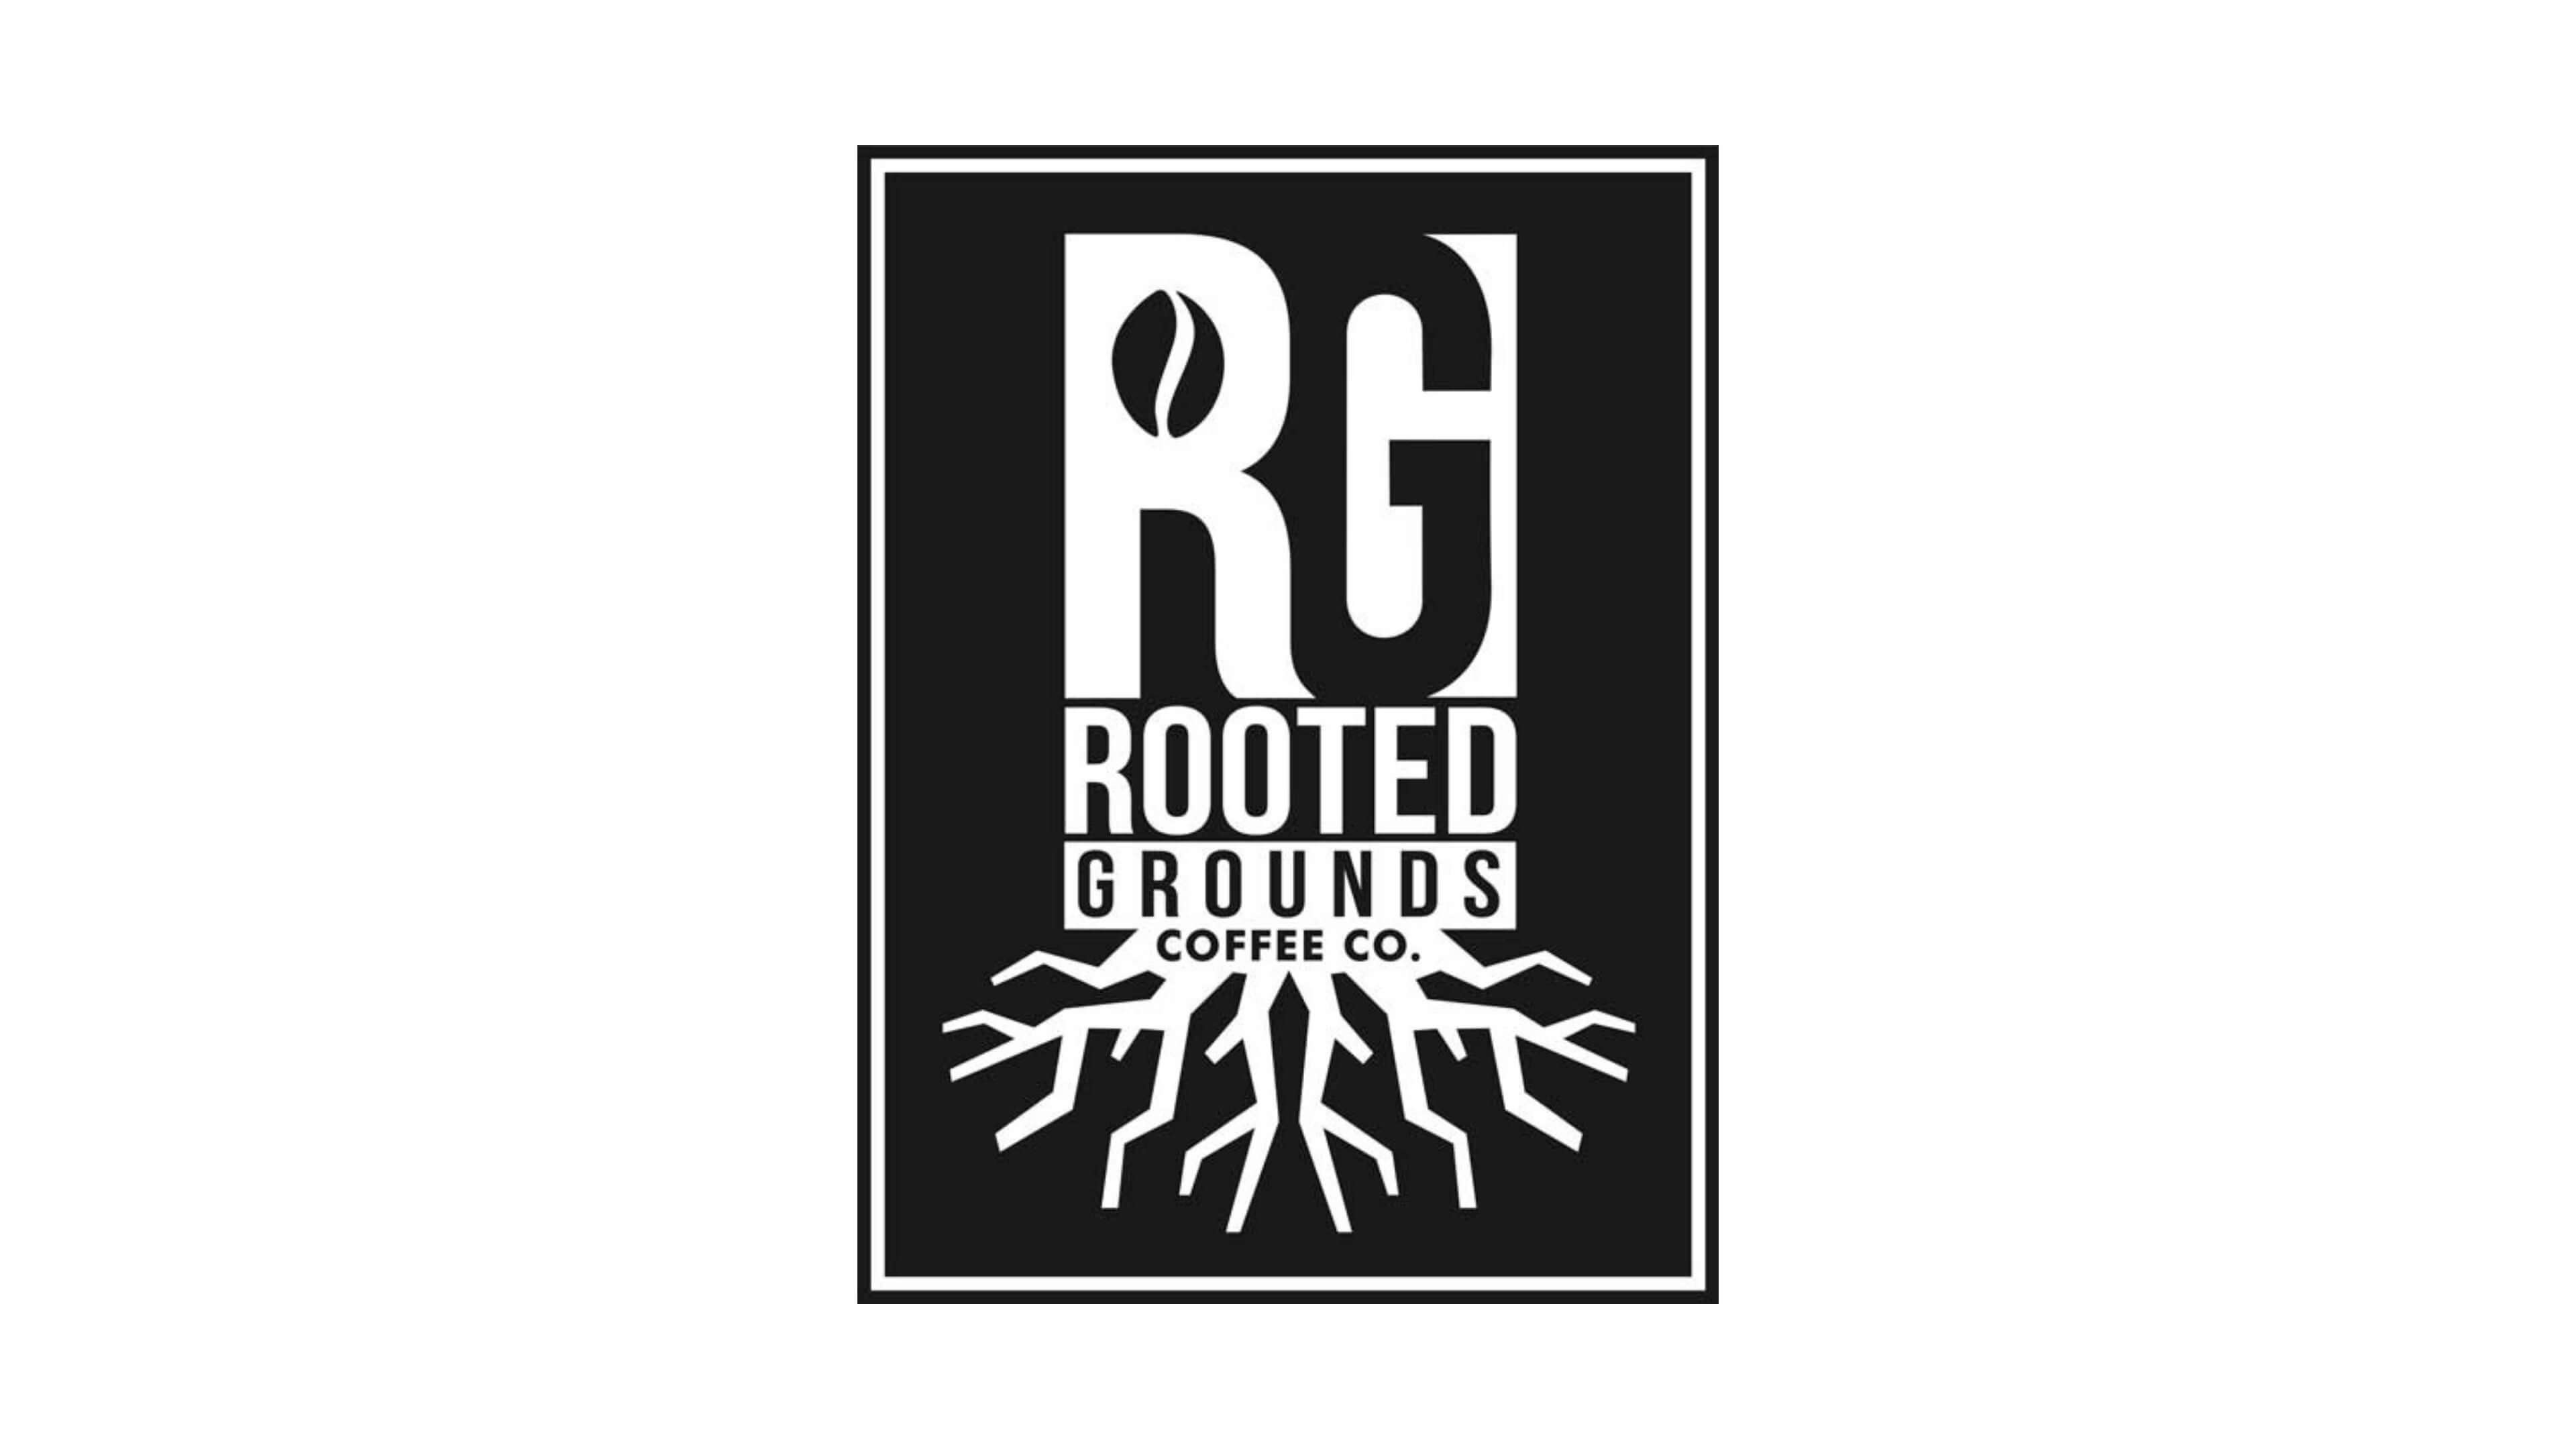 Rooted Grounds Coffee Co.